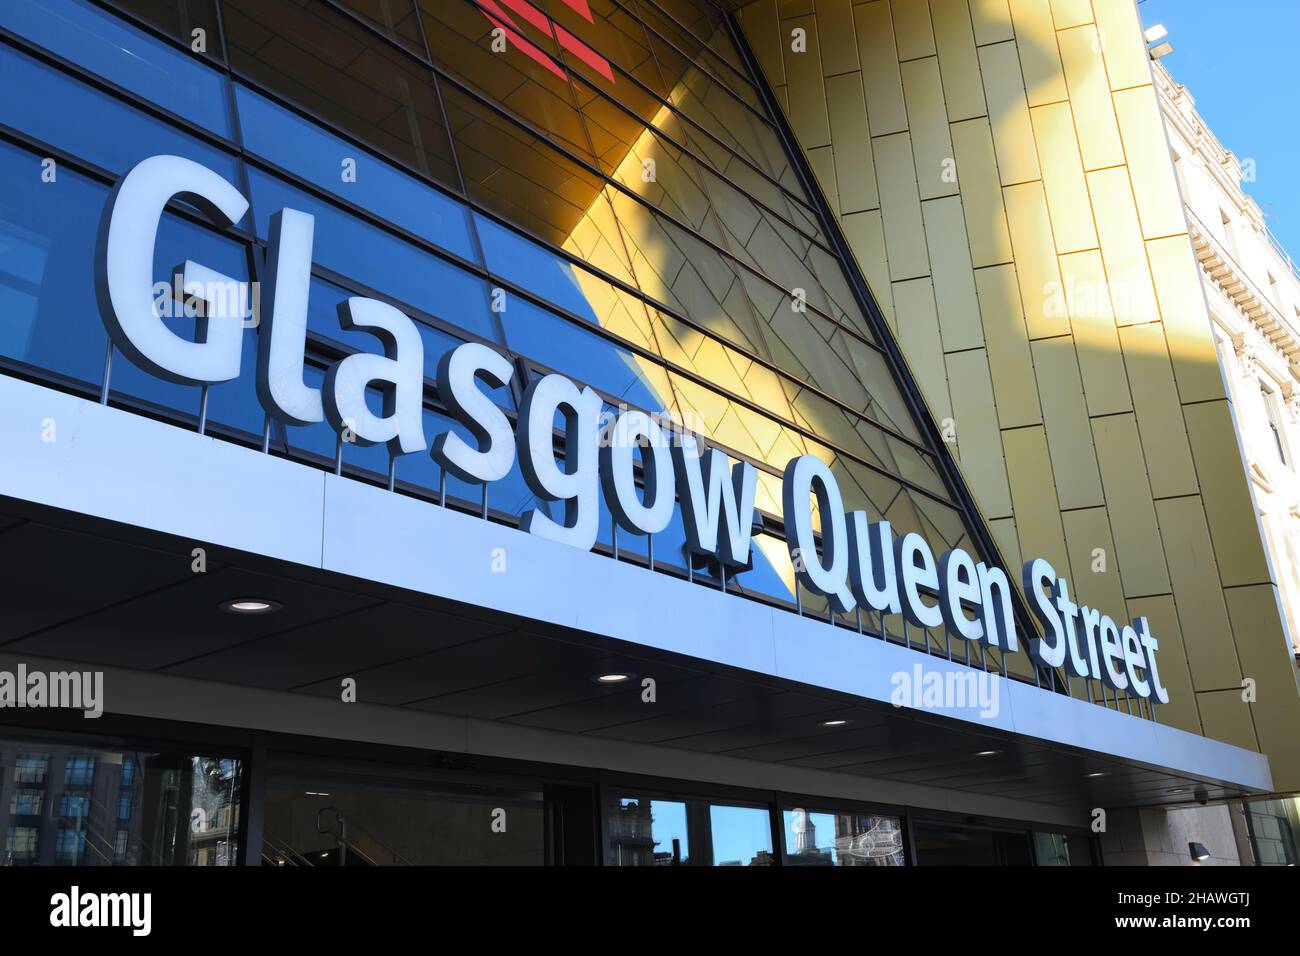 Exterior signage for Glasgow Queen Street train station in Scotland, UK Stock Photo